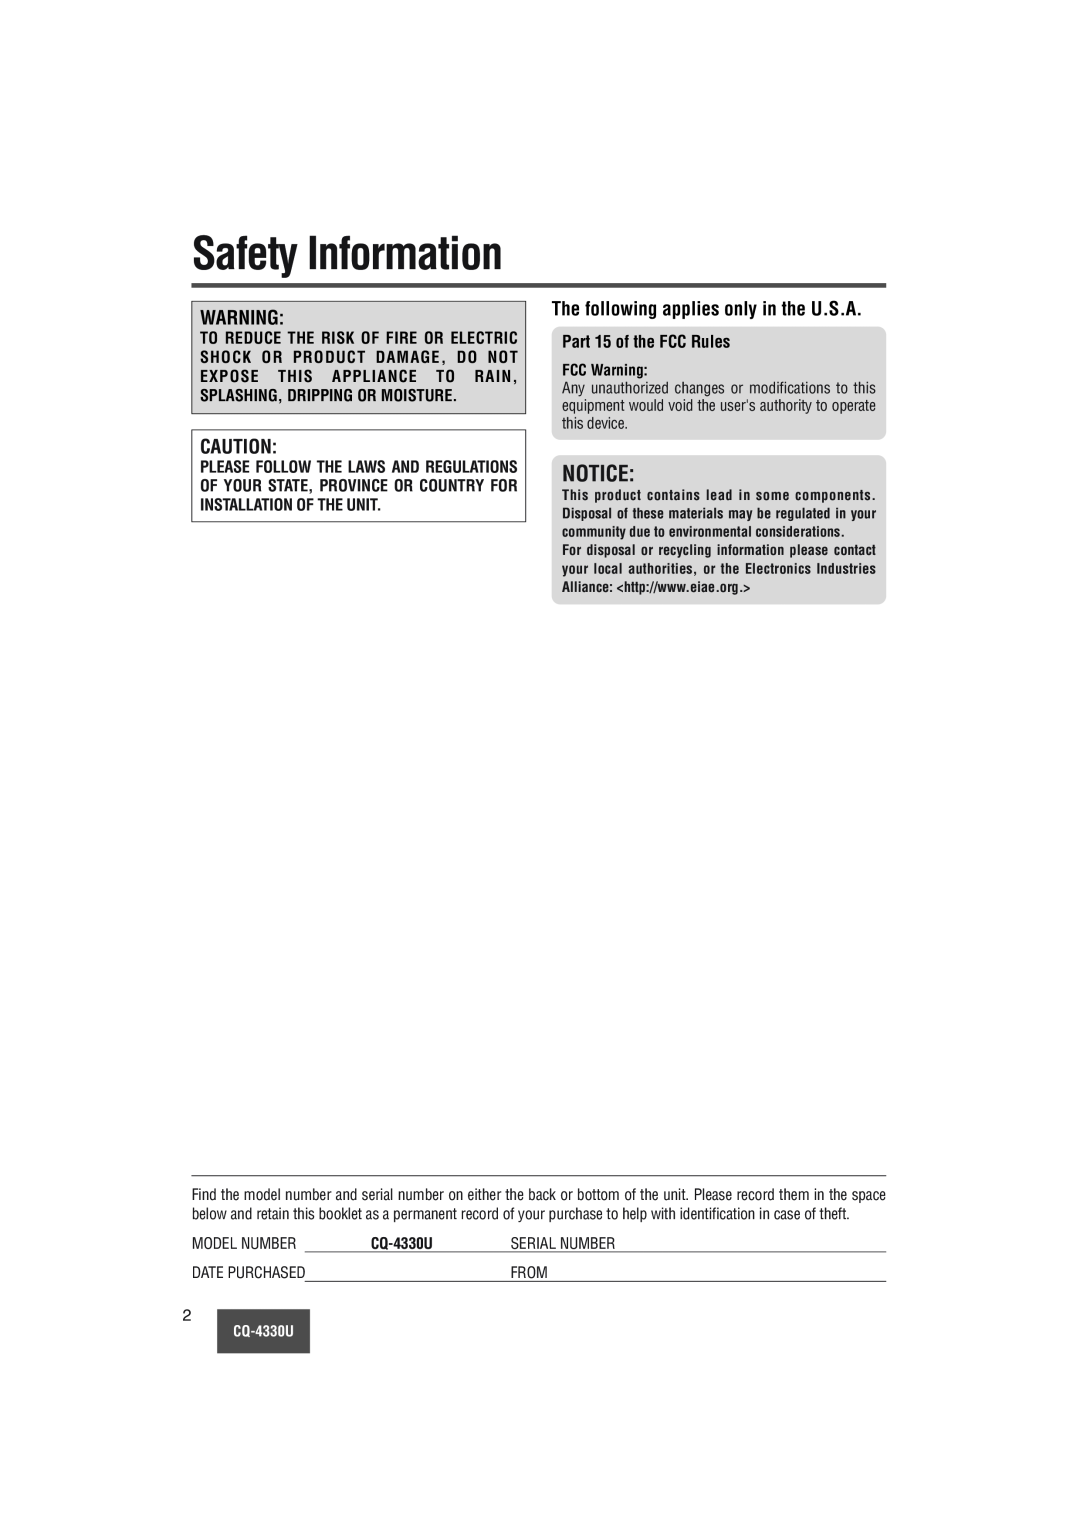 Panasonic CQ-4330U manual Safety Information, Part 15 of the FCC Rules, FCC Warning 